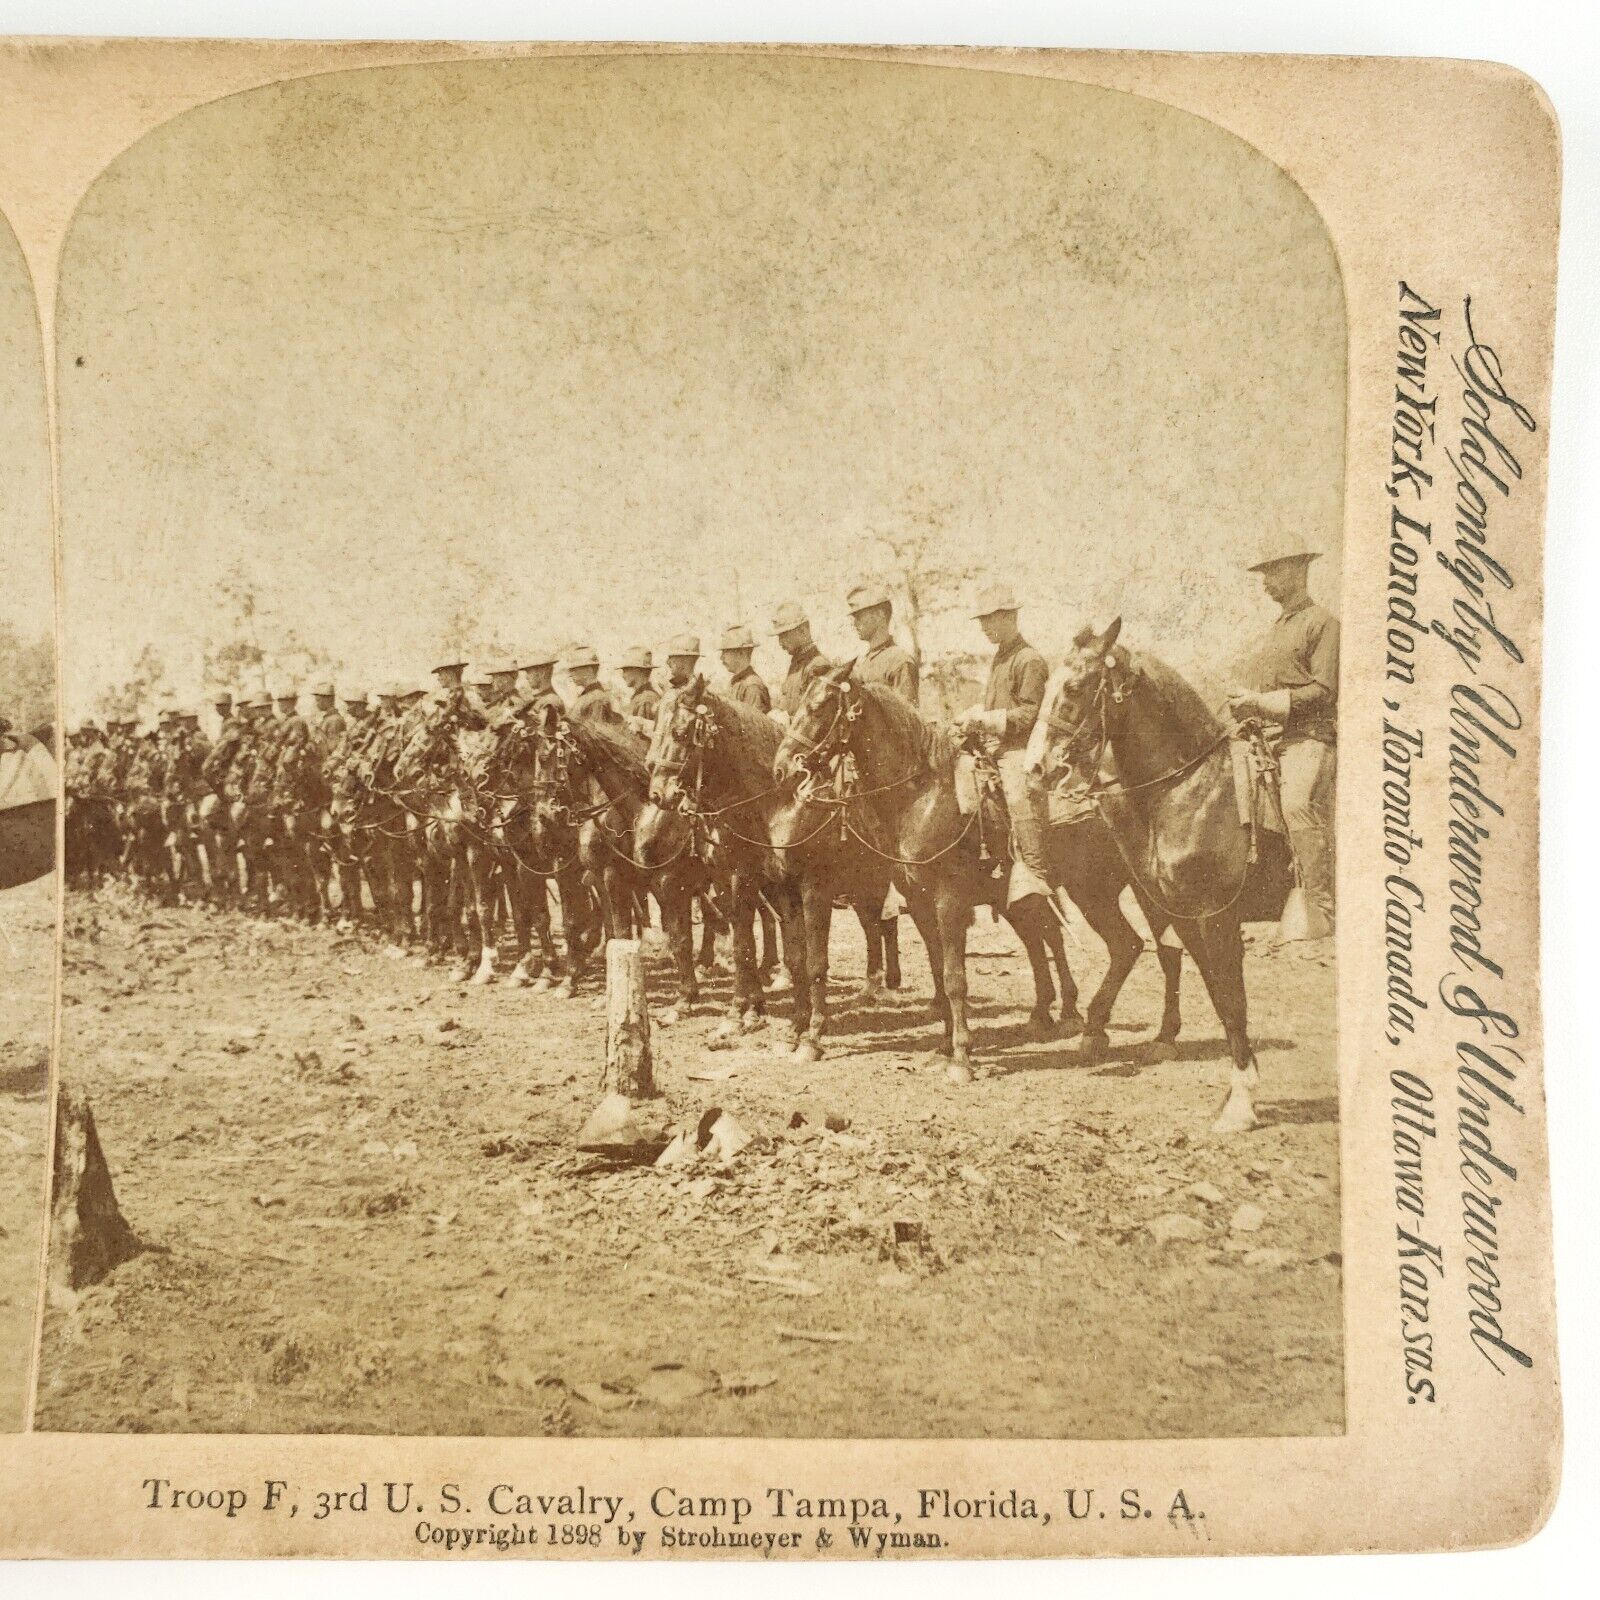 Camp Tampa Cavalry Troop F Stereoview c1898 Spanish American War Florida A2202